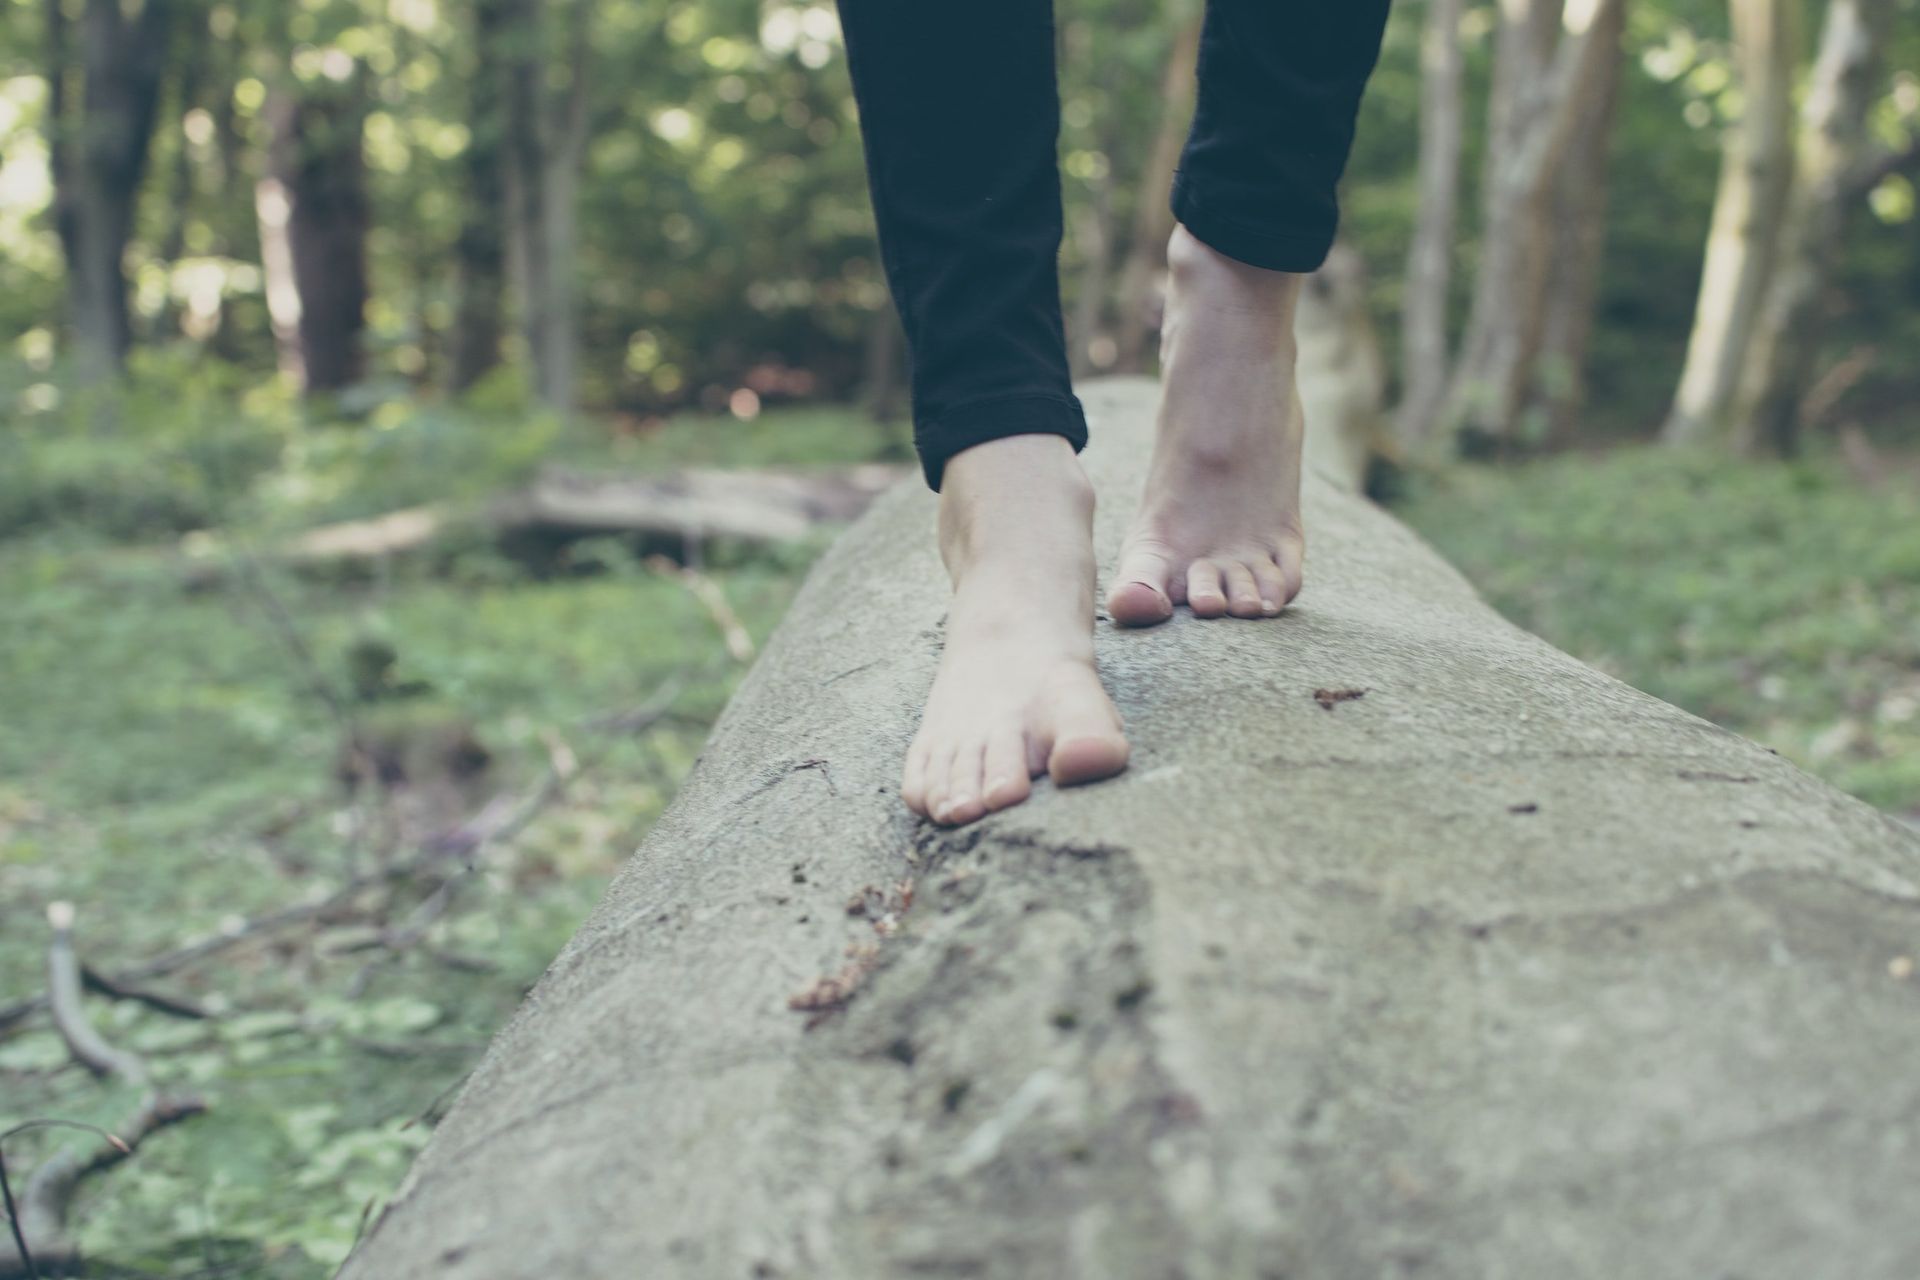 A person is walking barefoot on a log in the woods.